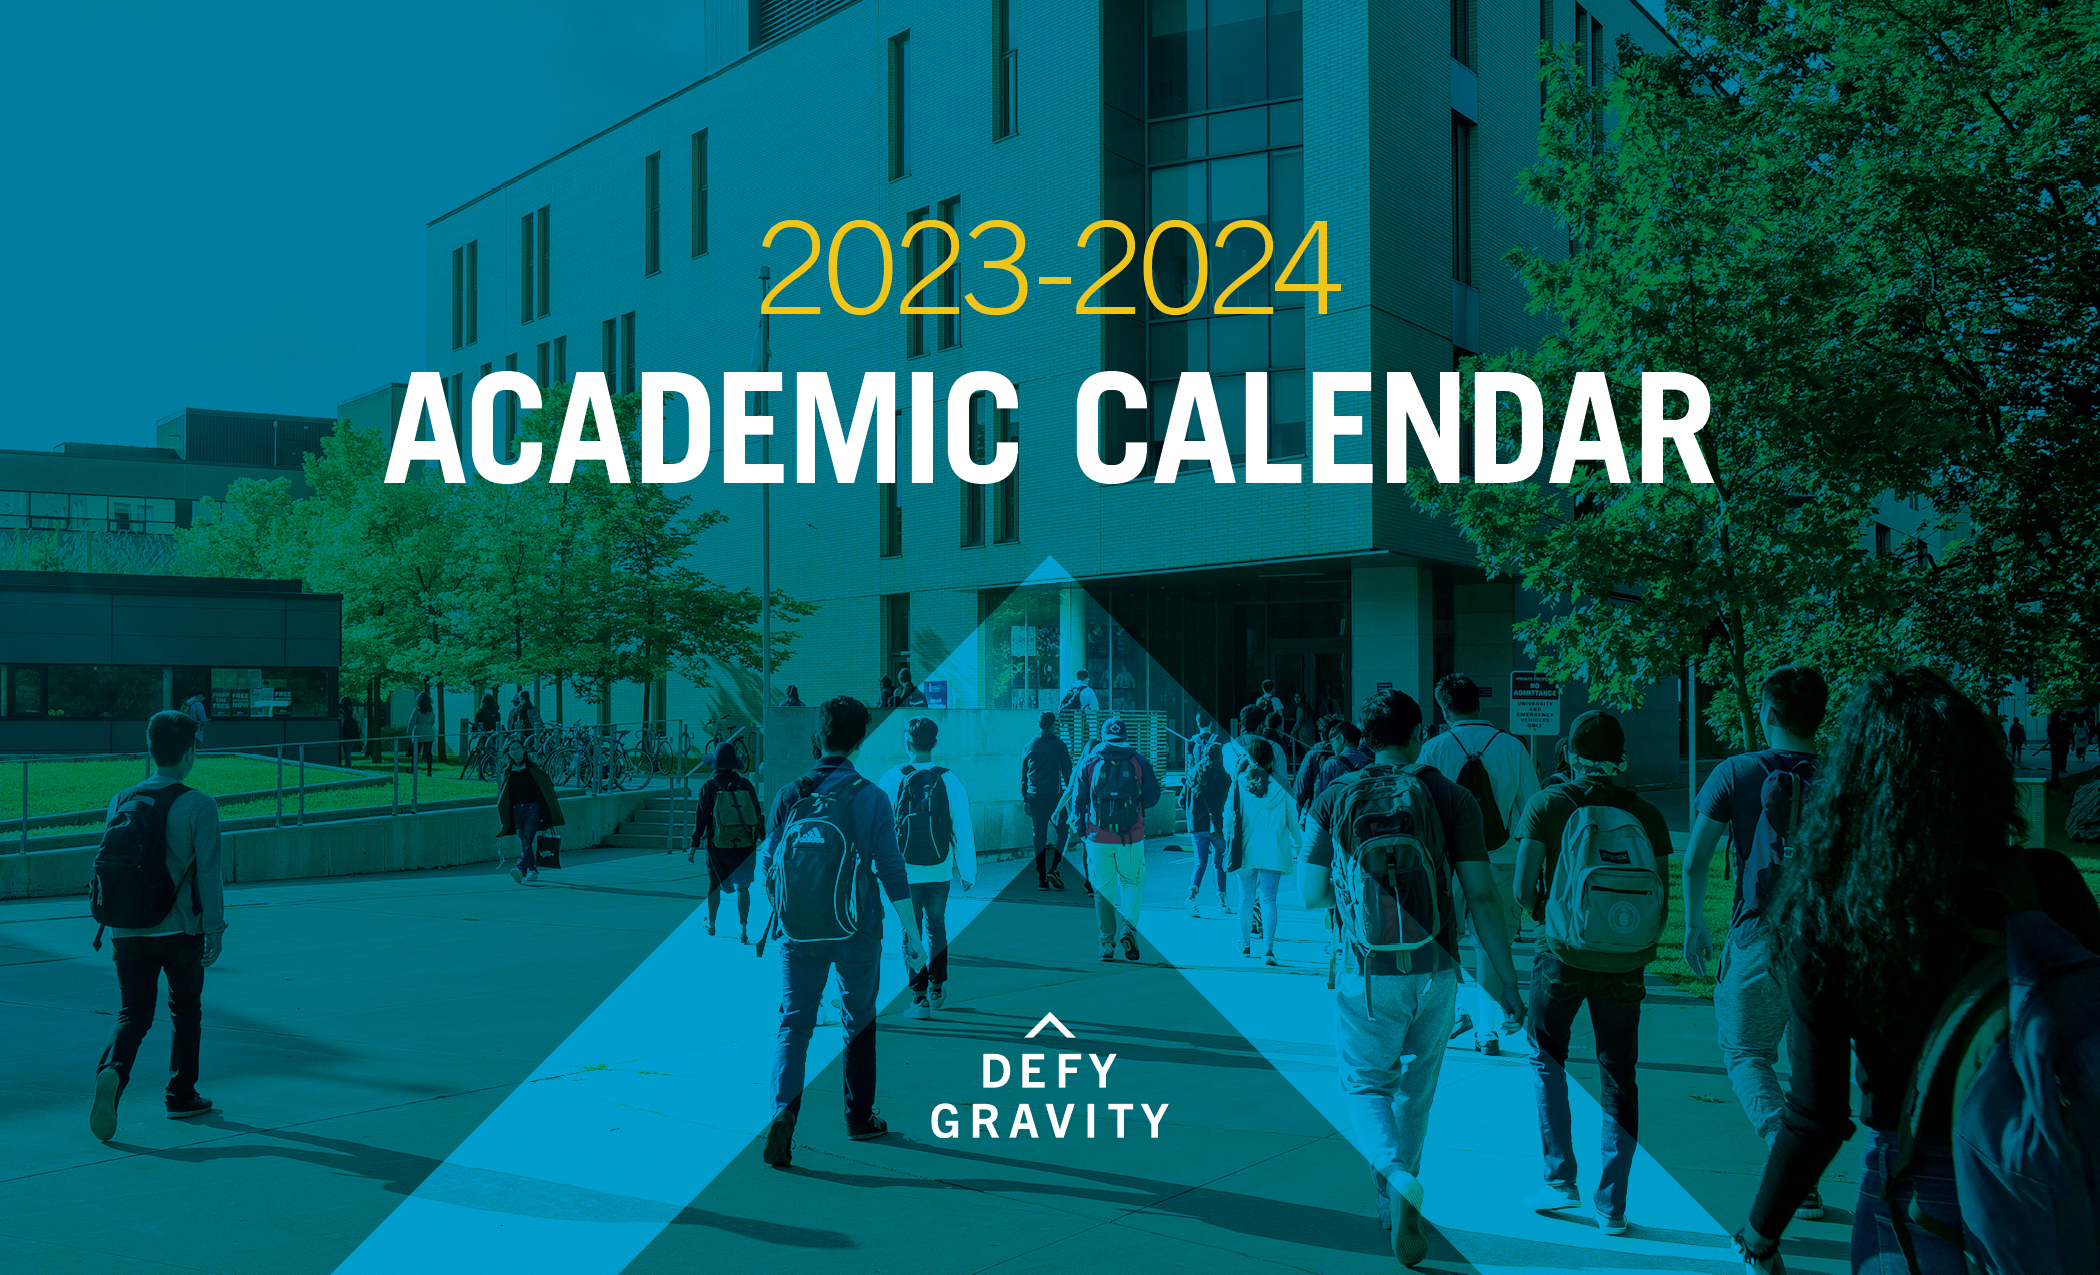 Graphic of UTSC Campus with text reading "2023-2024 Academic Calendar"